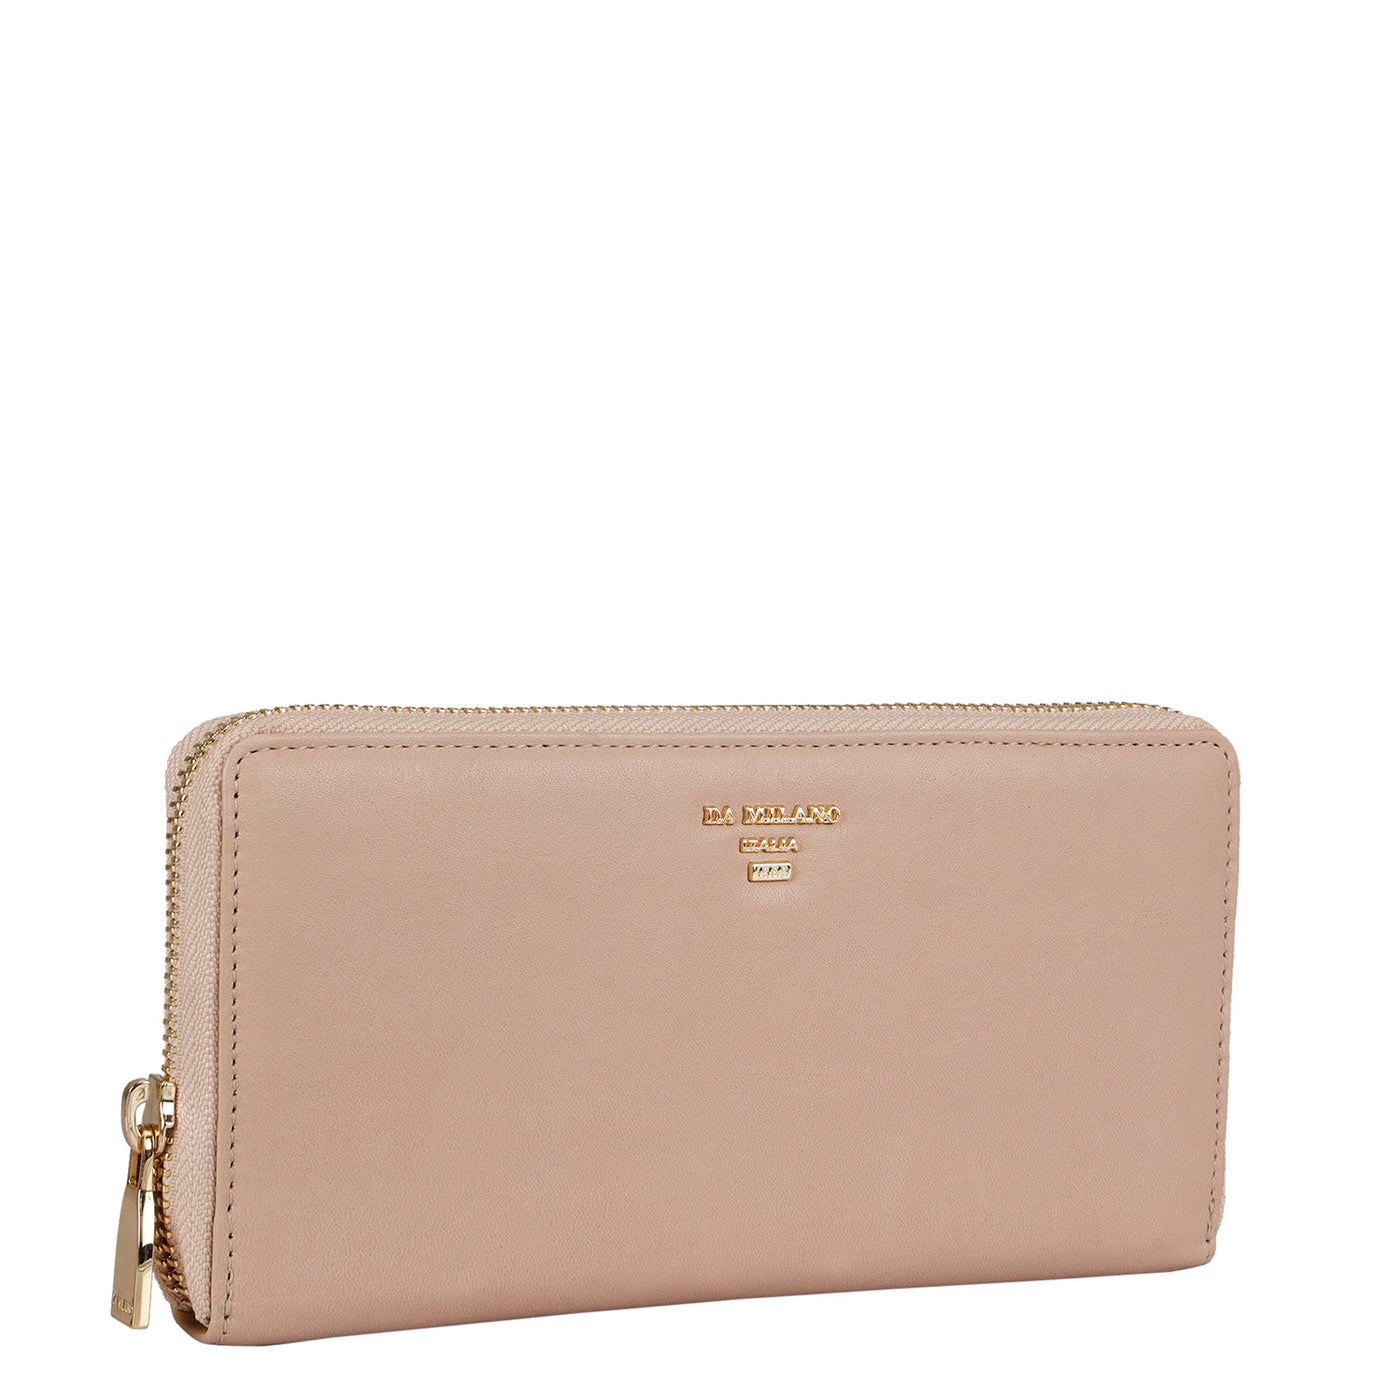 Plain Leather Ladies Wallet - Taupe